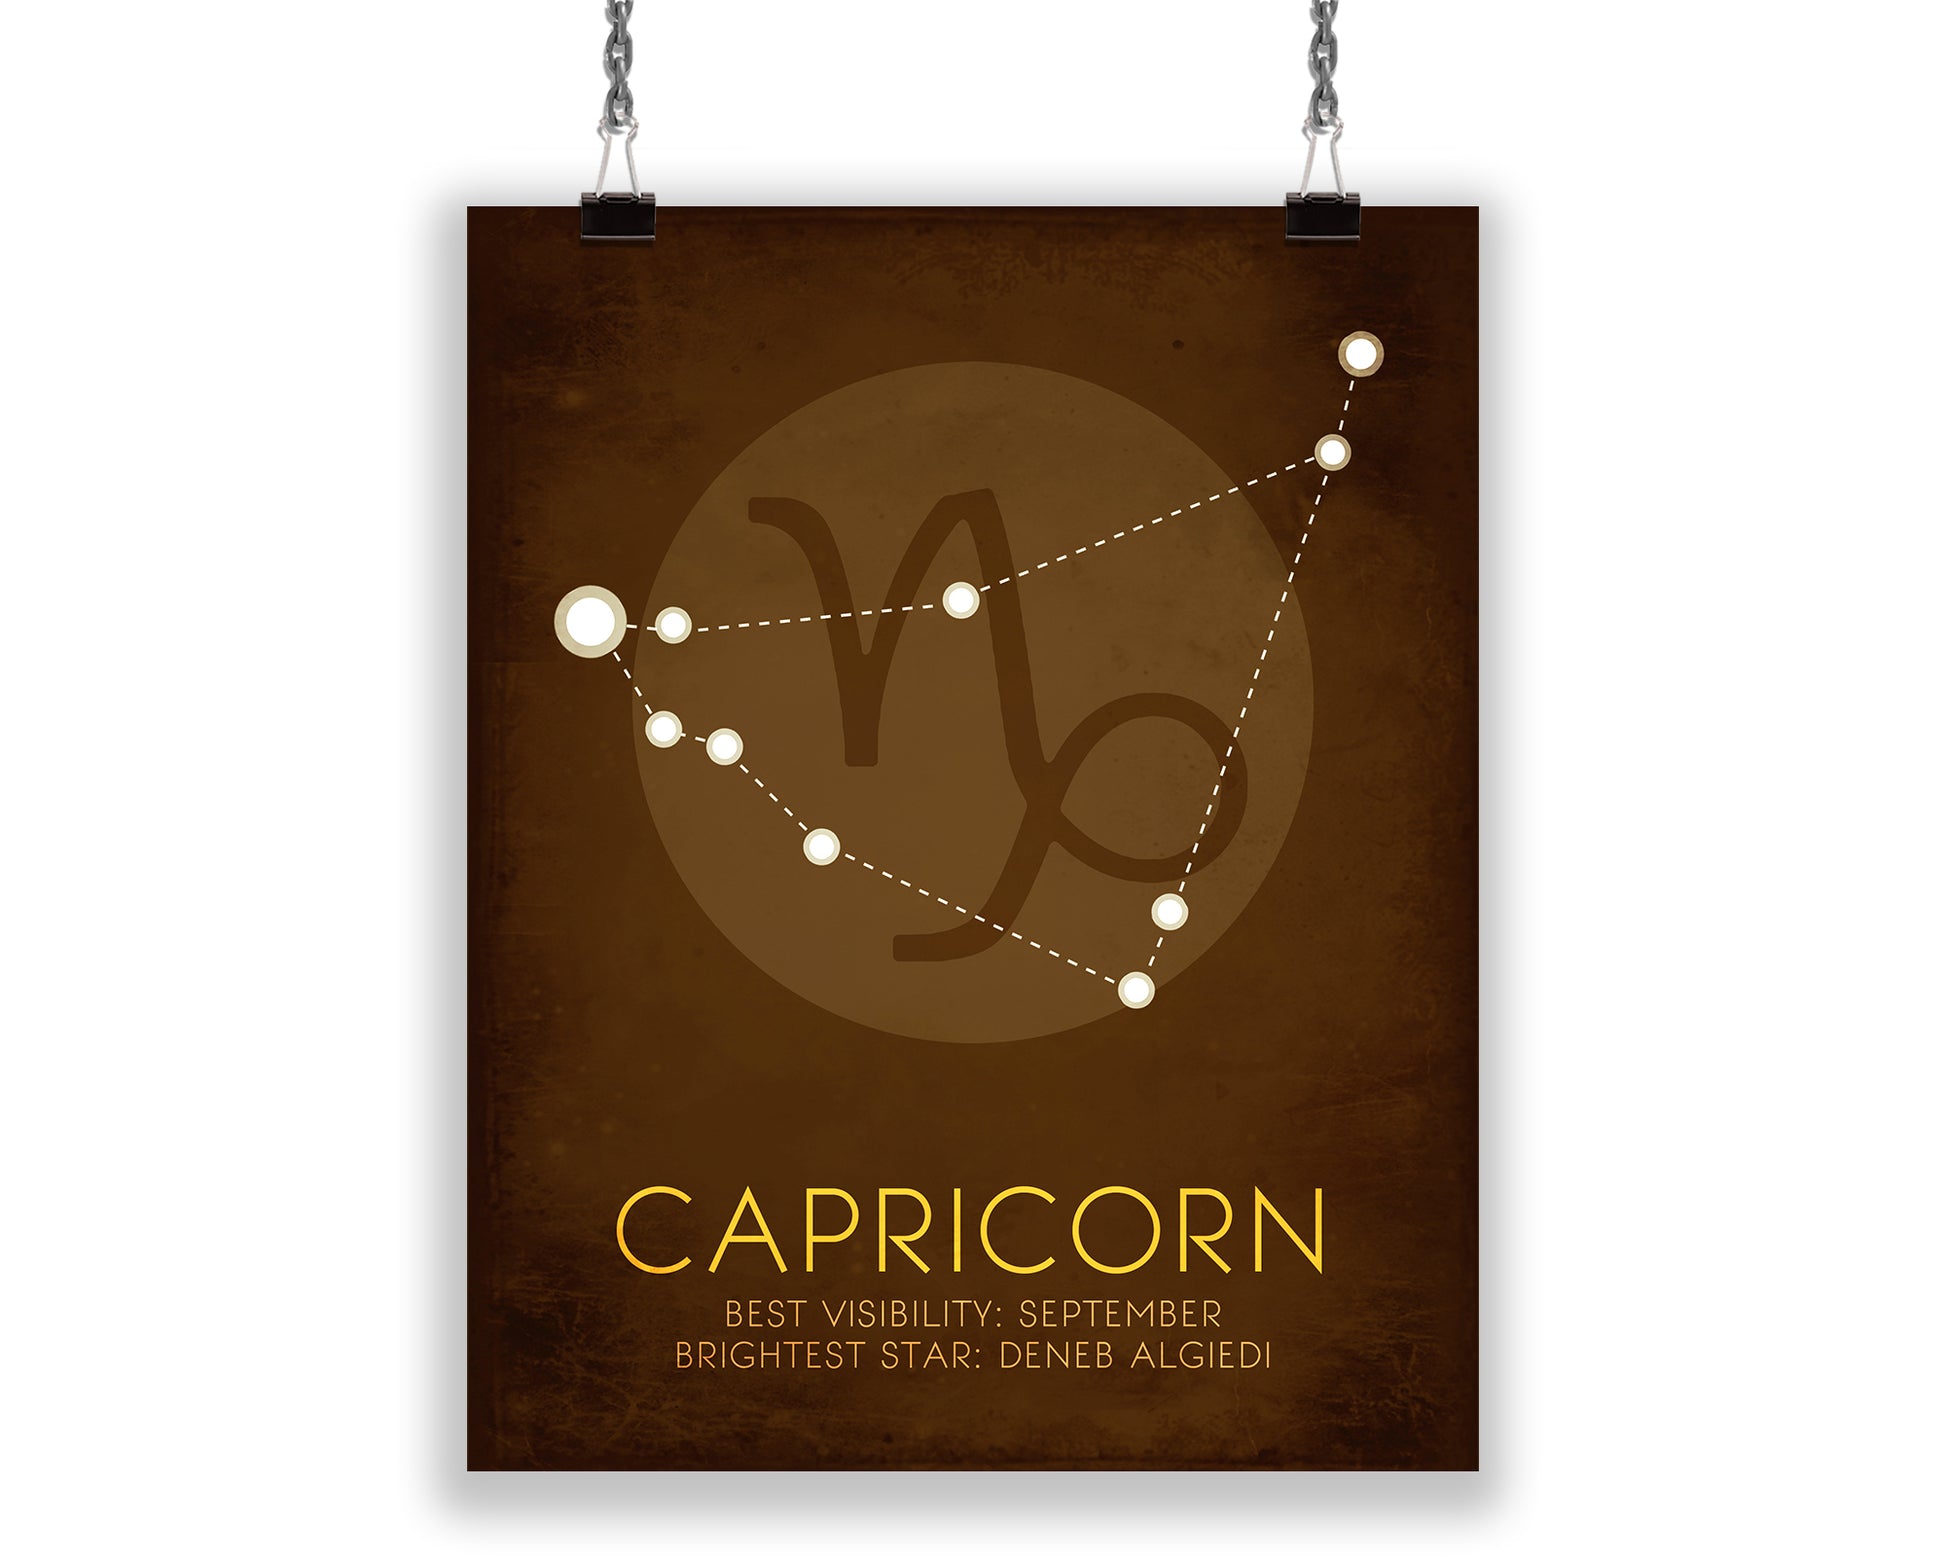 A rich brown art print with a minimalist representations of the  Capricorn star constellation, the best month for visibility, and the brightest star in the constellation.